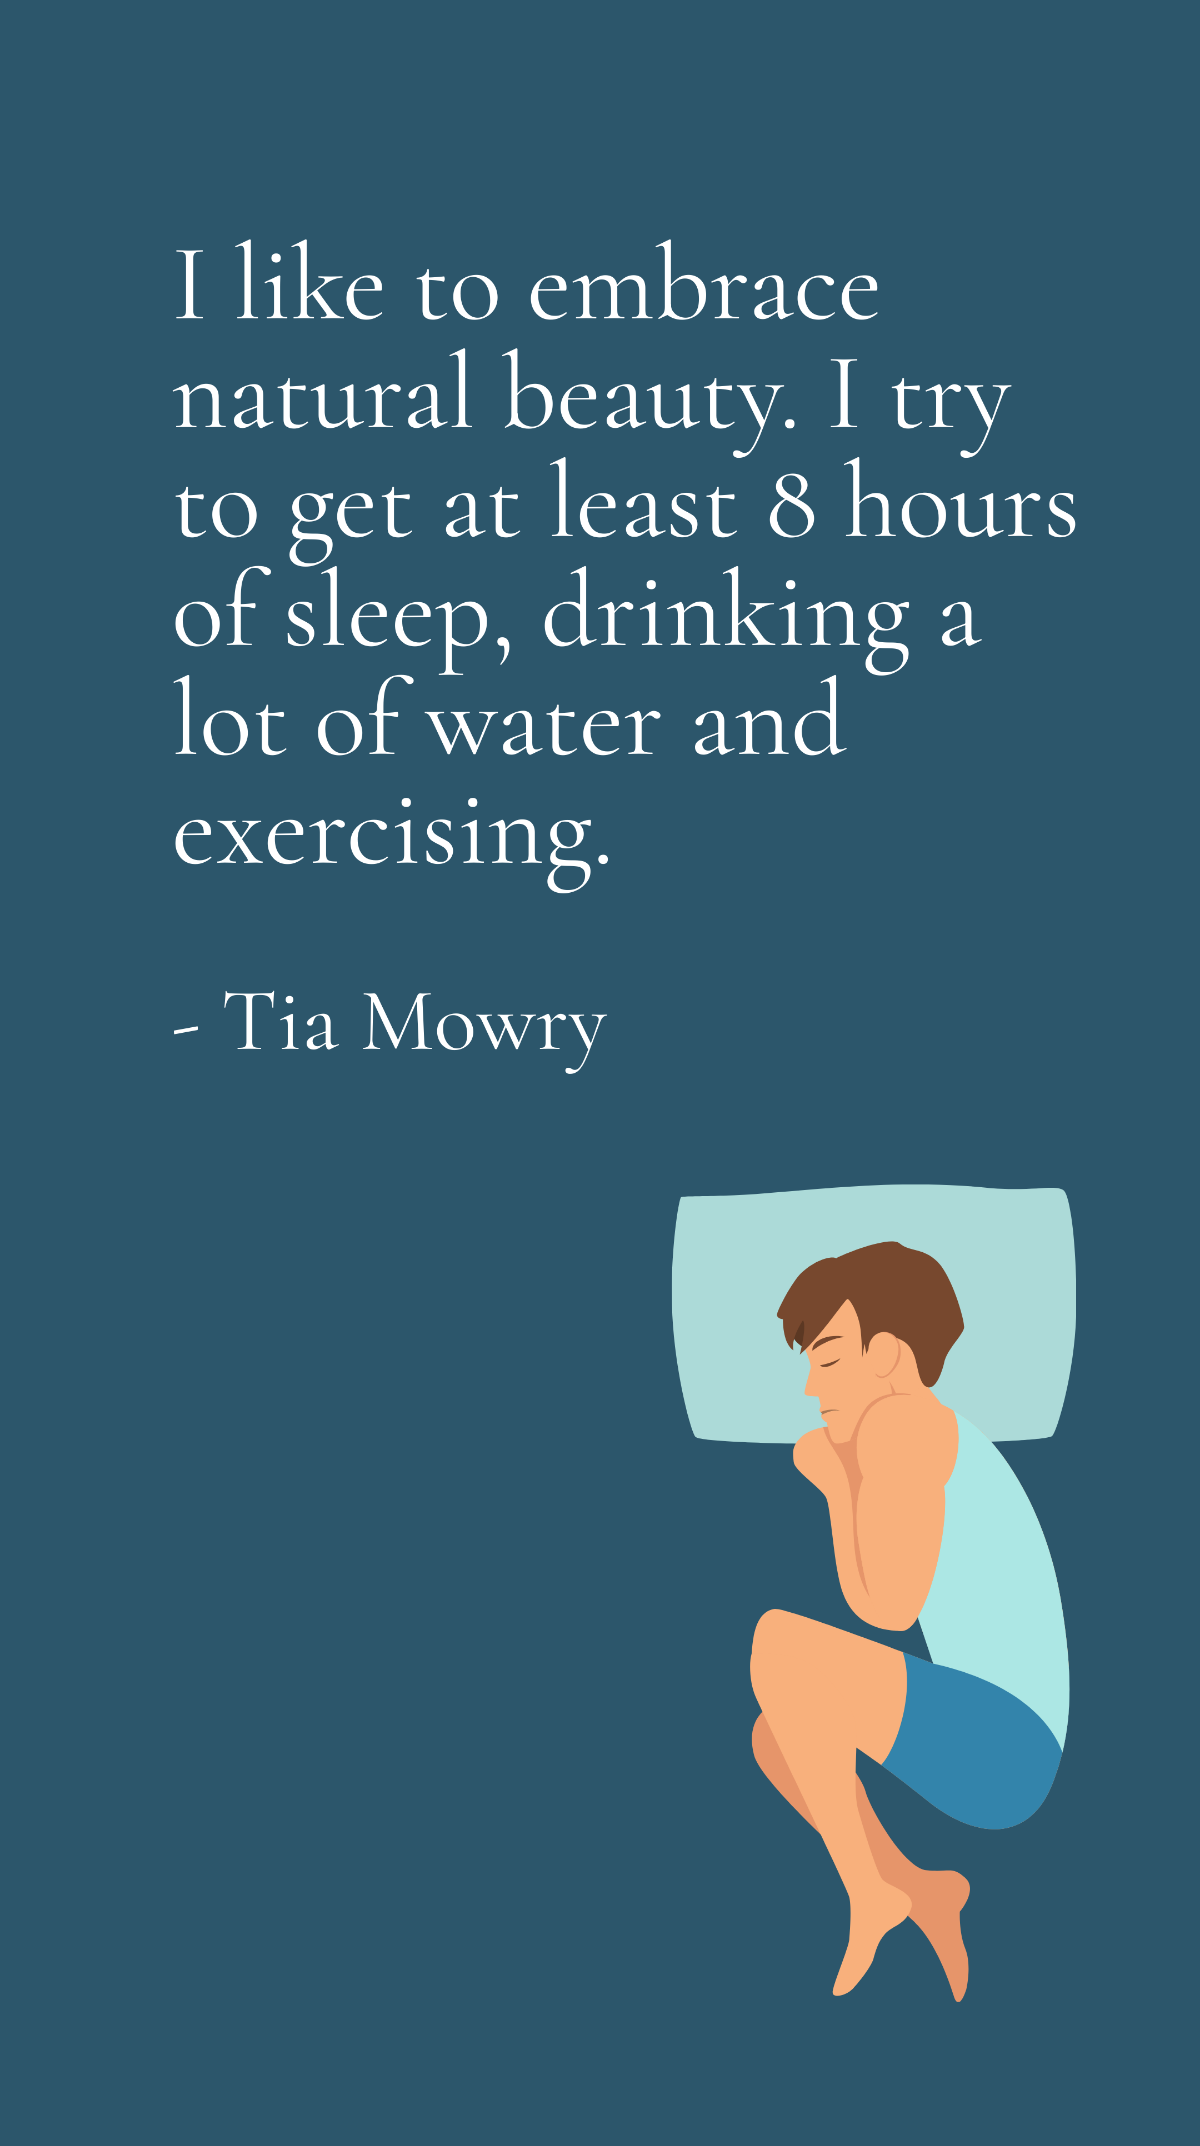 Tia Mowry - I like to embrace natural beauty. I try to get at least 8 hours of sleep, drinking a lot of water and exercising.